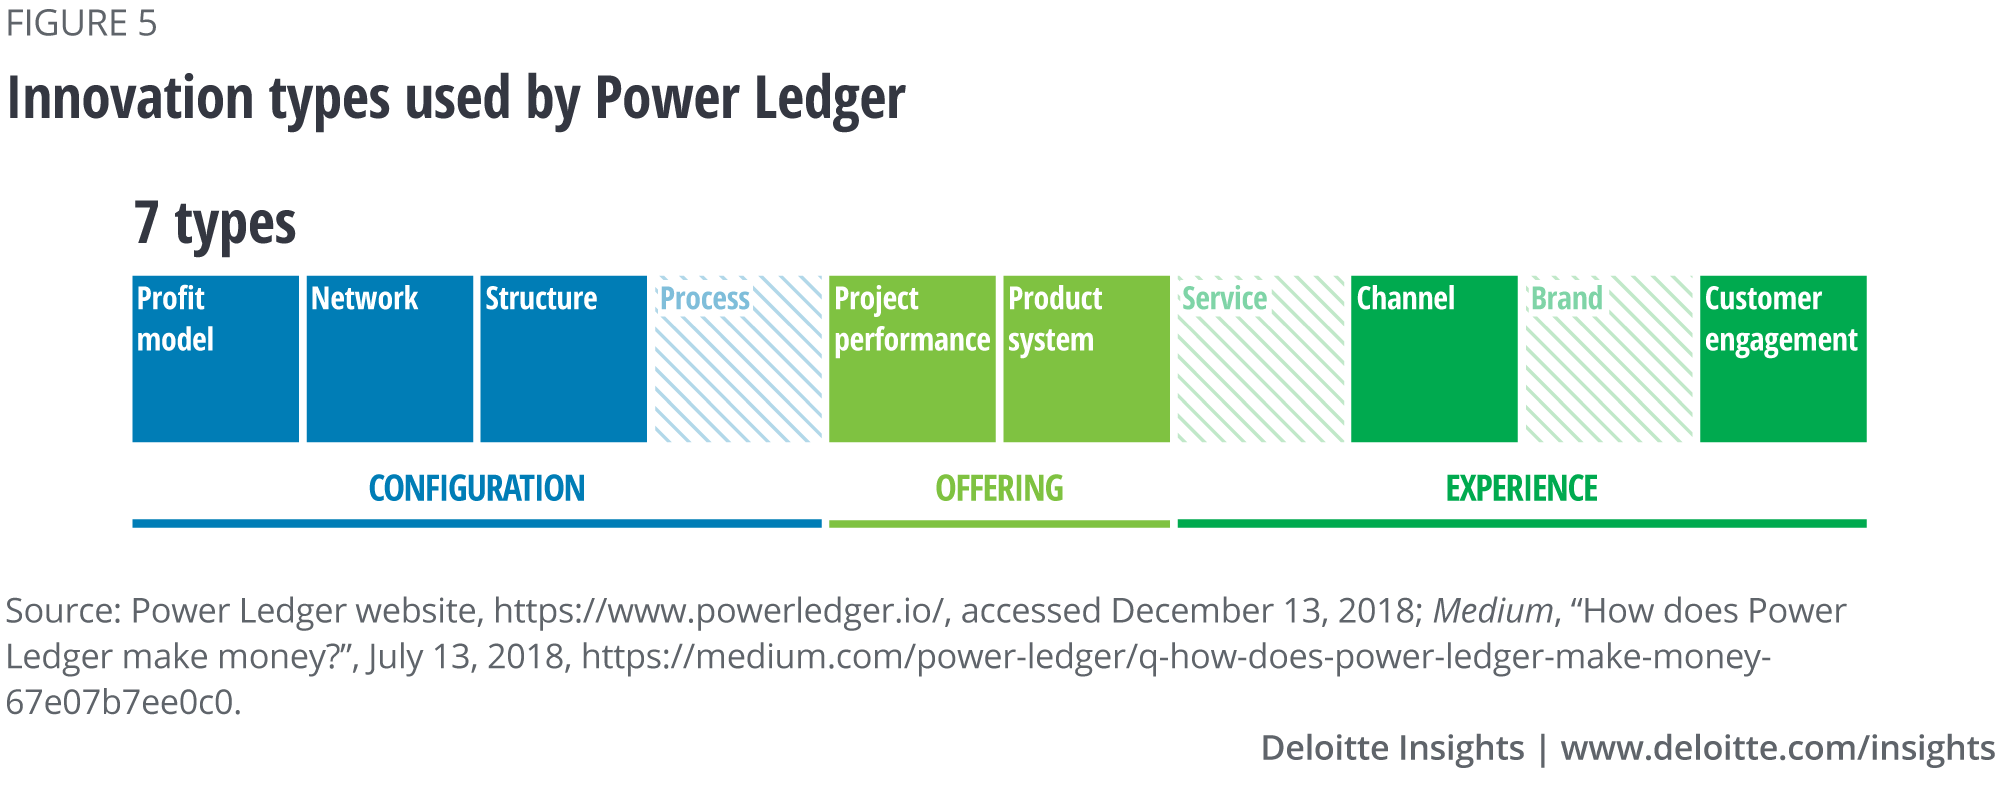 Innovation types used by Power Ledger